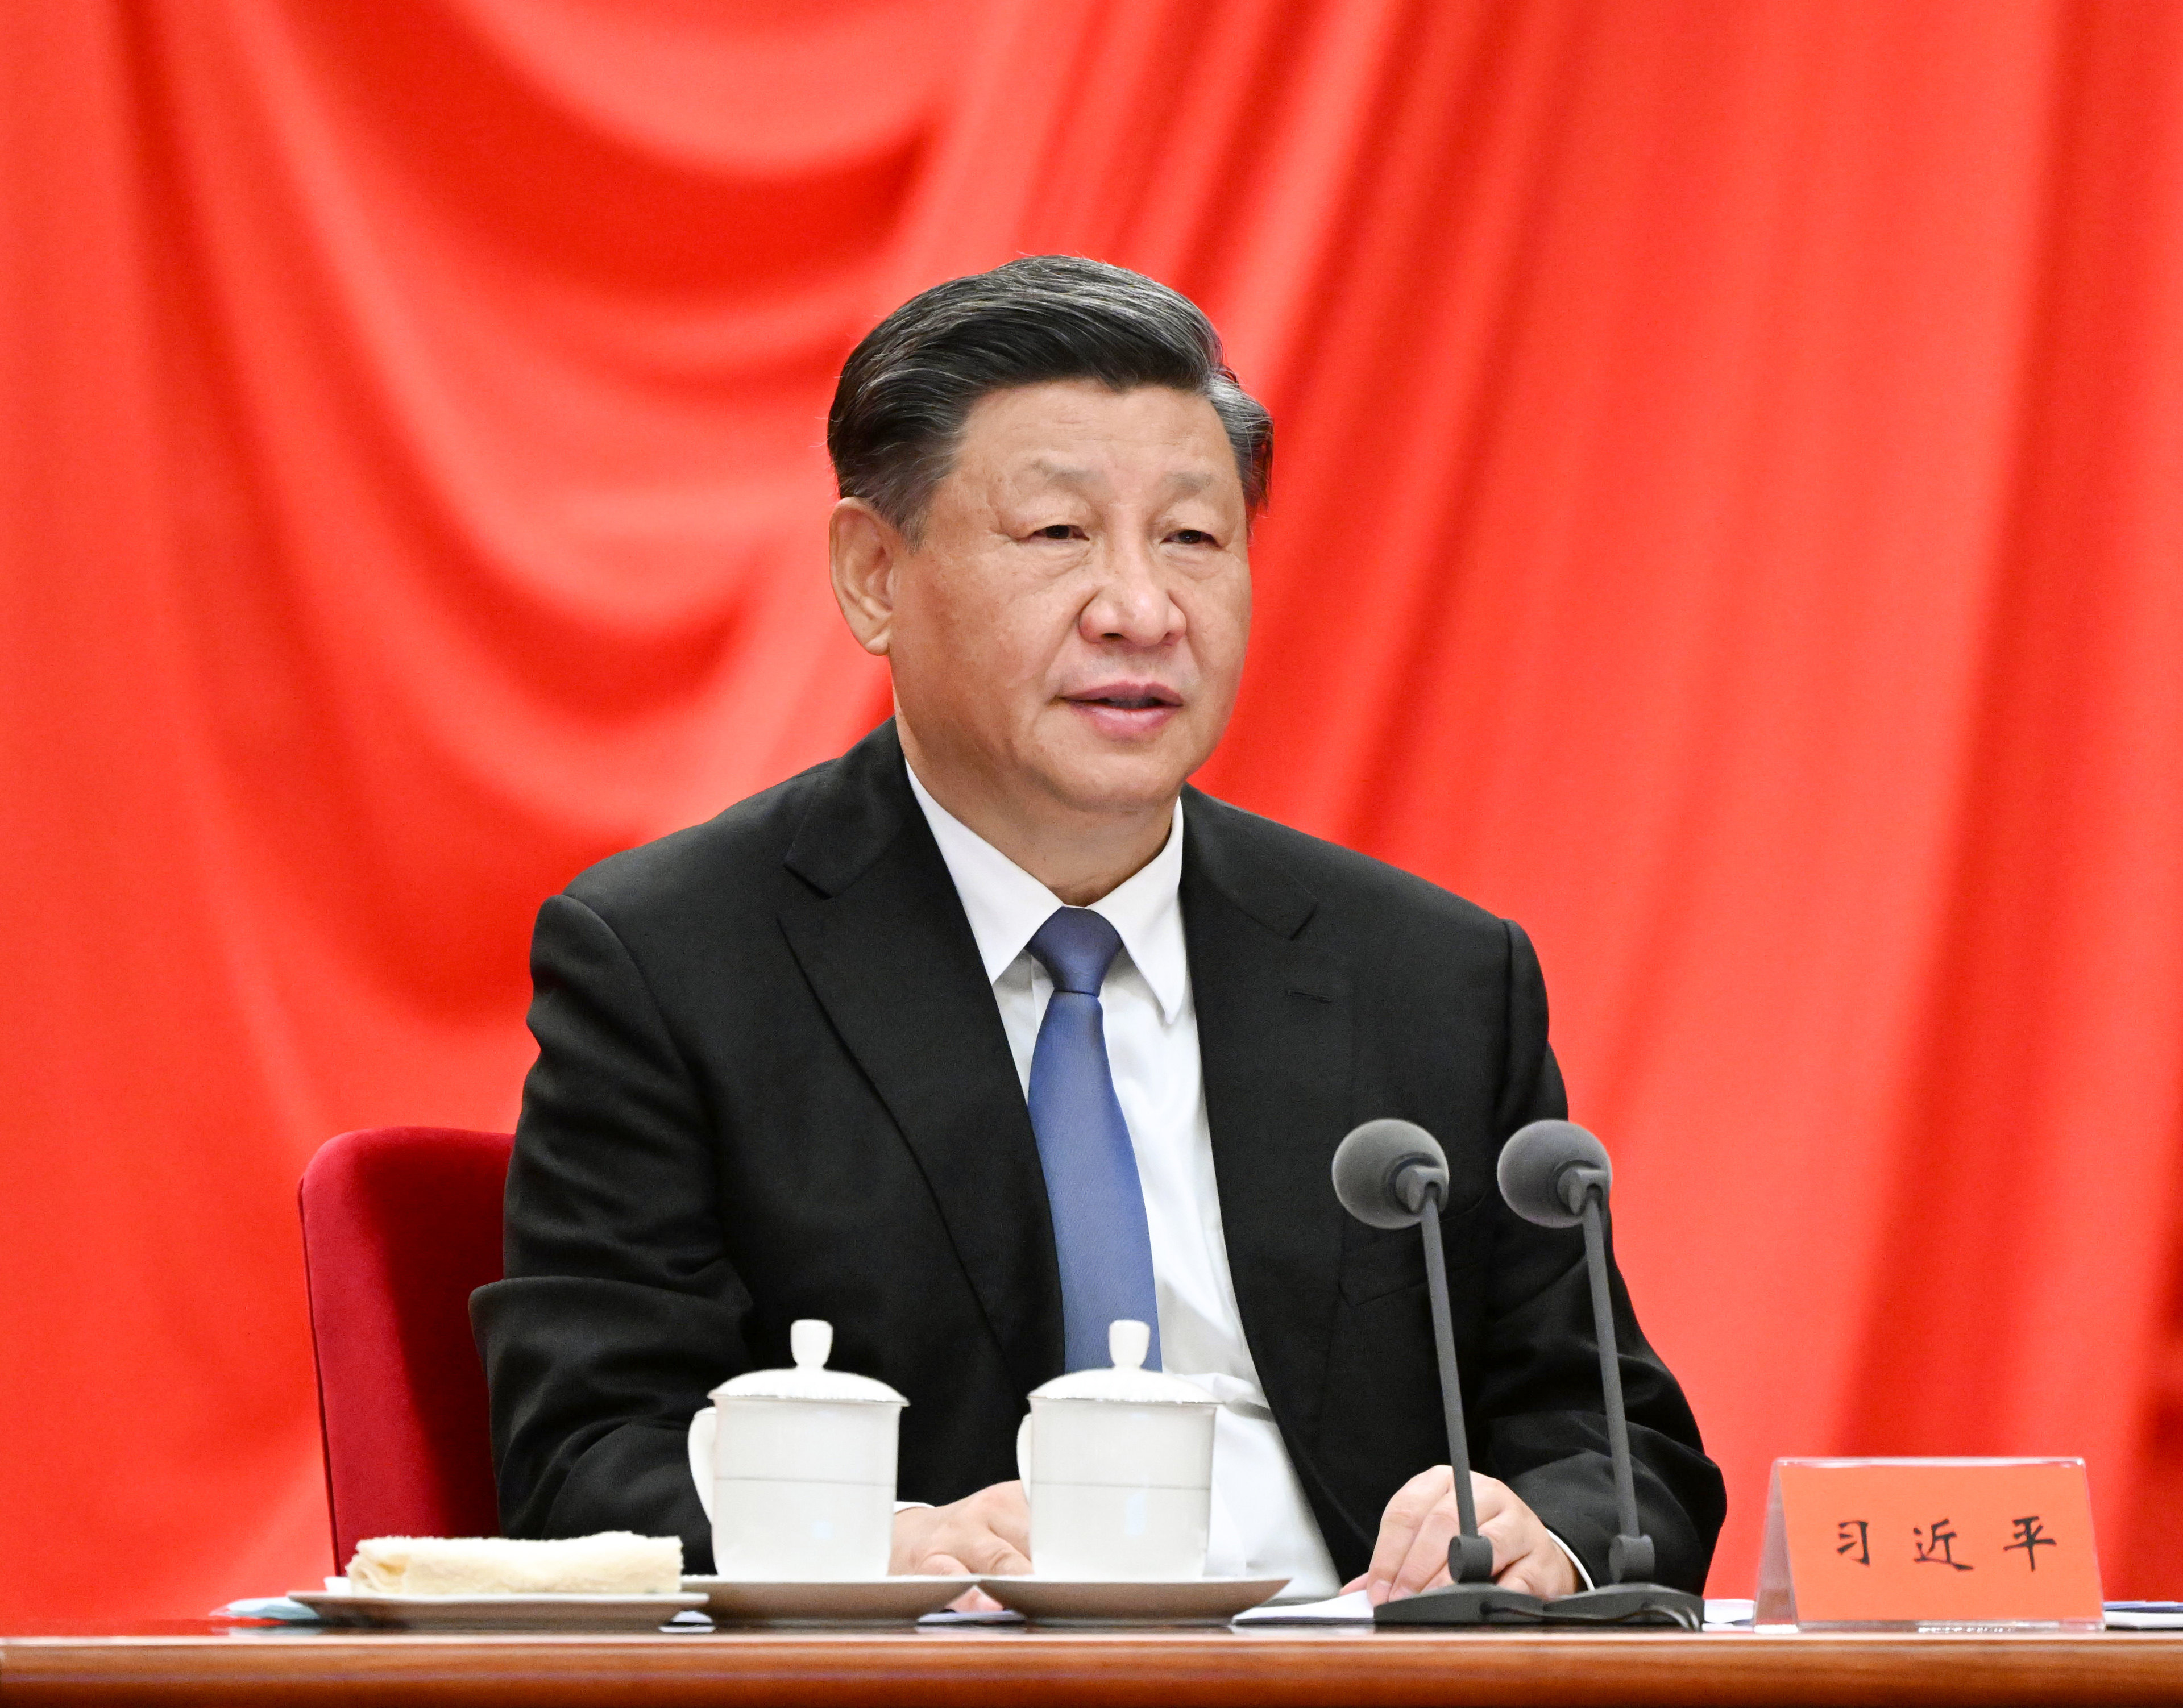 Xi Jinping has vowed to continue his anti-corruption campaign. Photo: Xinhua